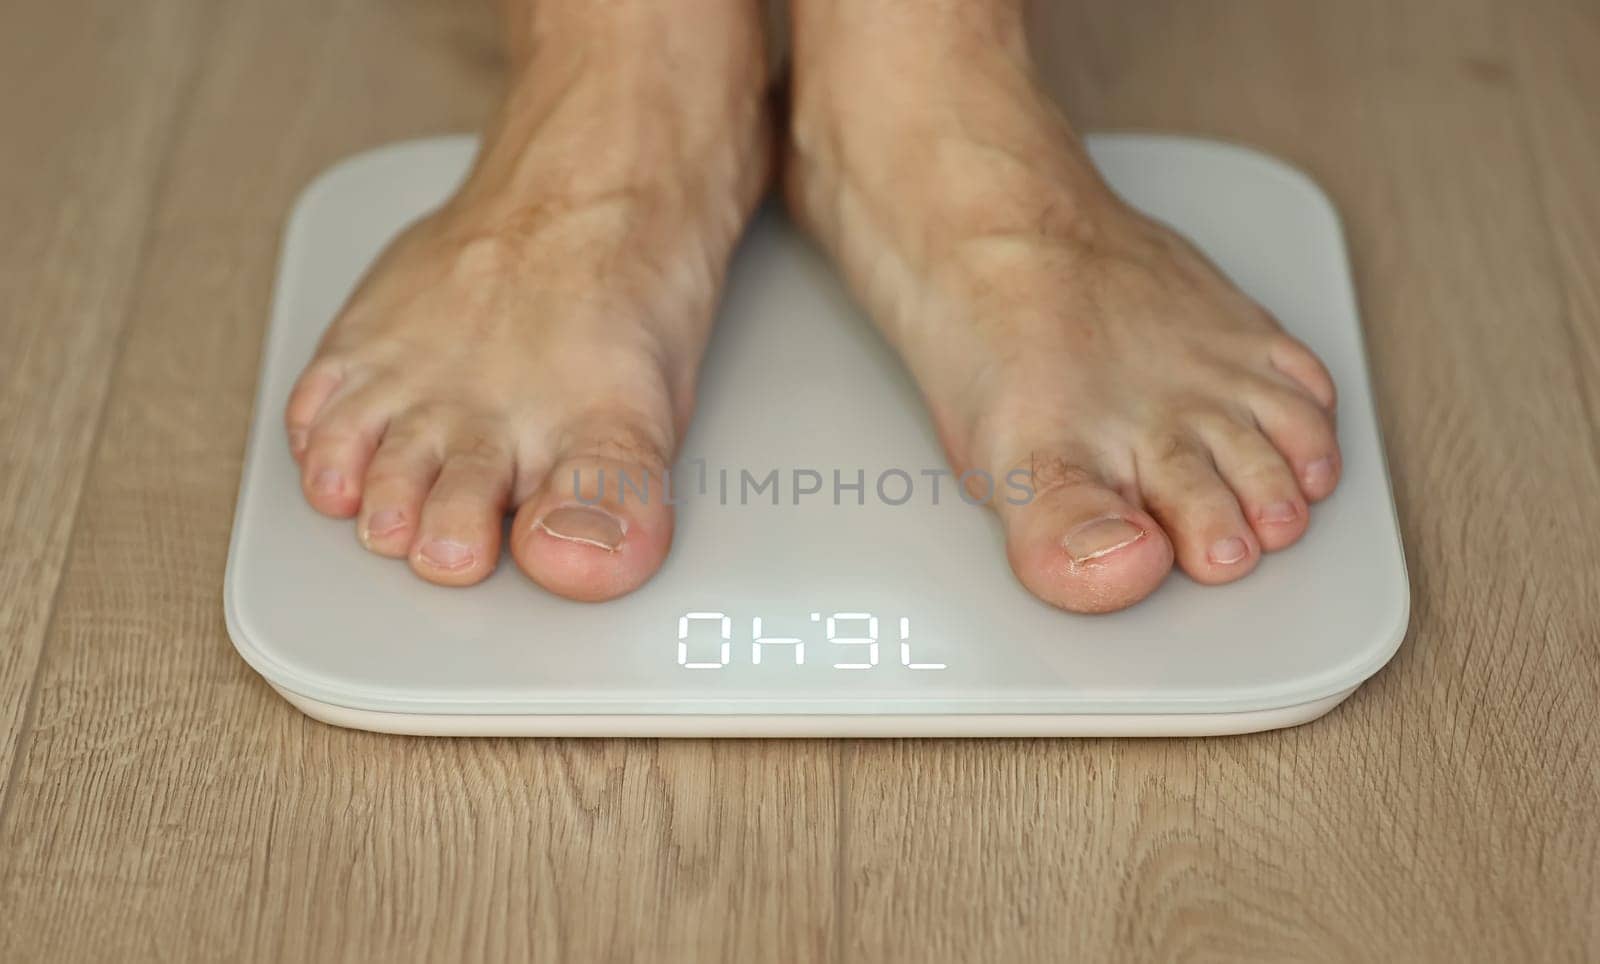 Man weighing himself - male bare feet stepping on white digital floor scales at home: close up view. Measuring weight, control, wellness and diet concept.